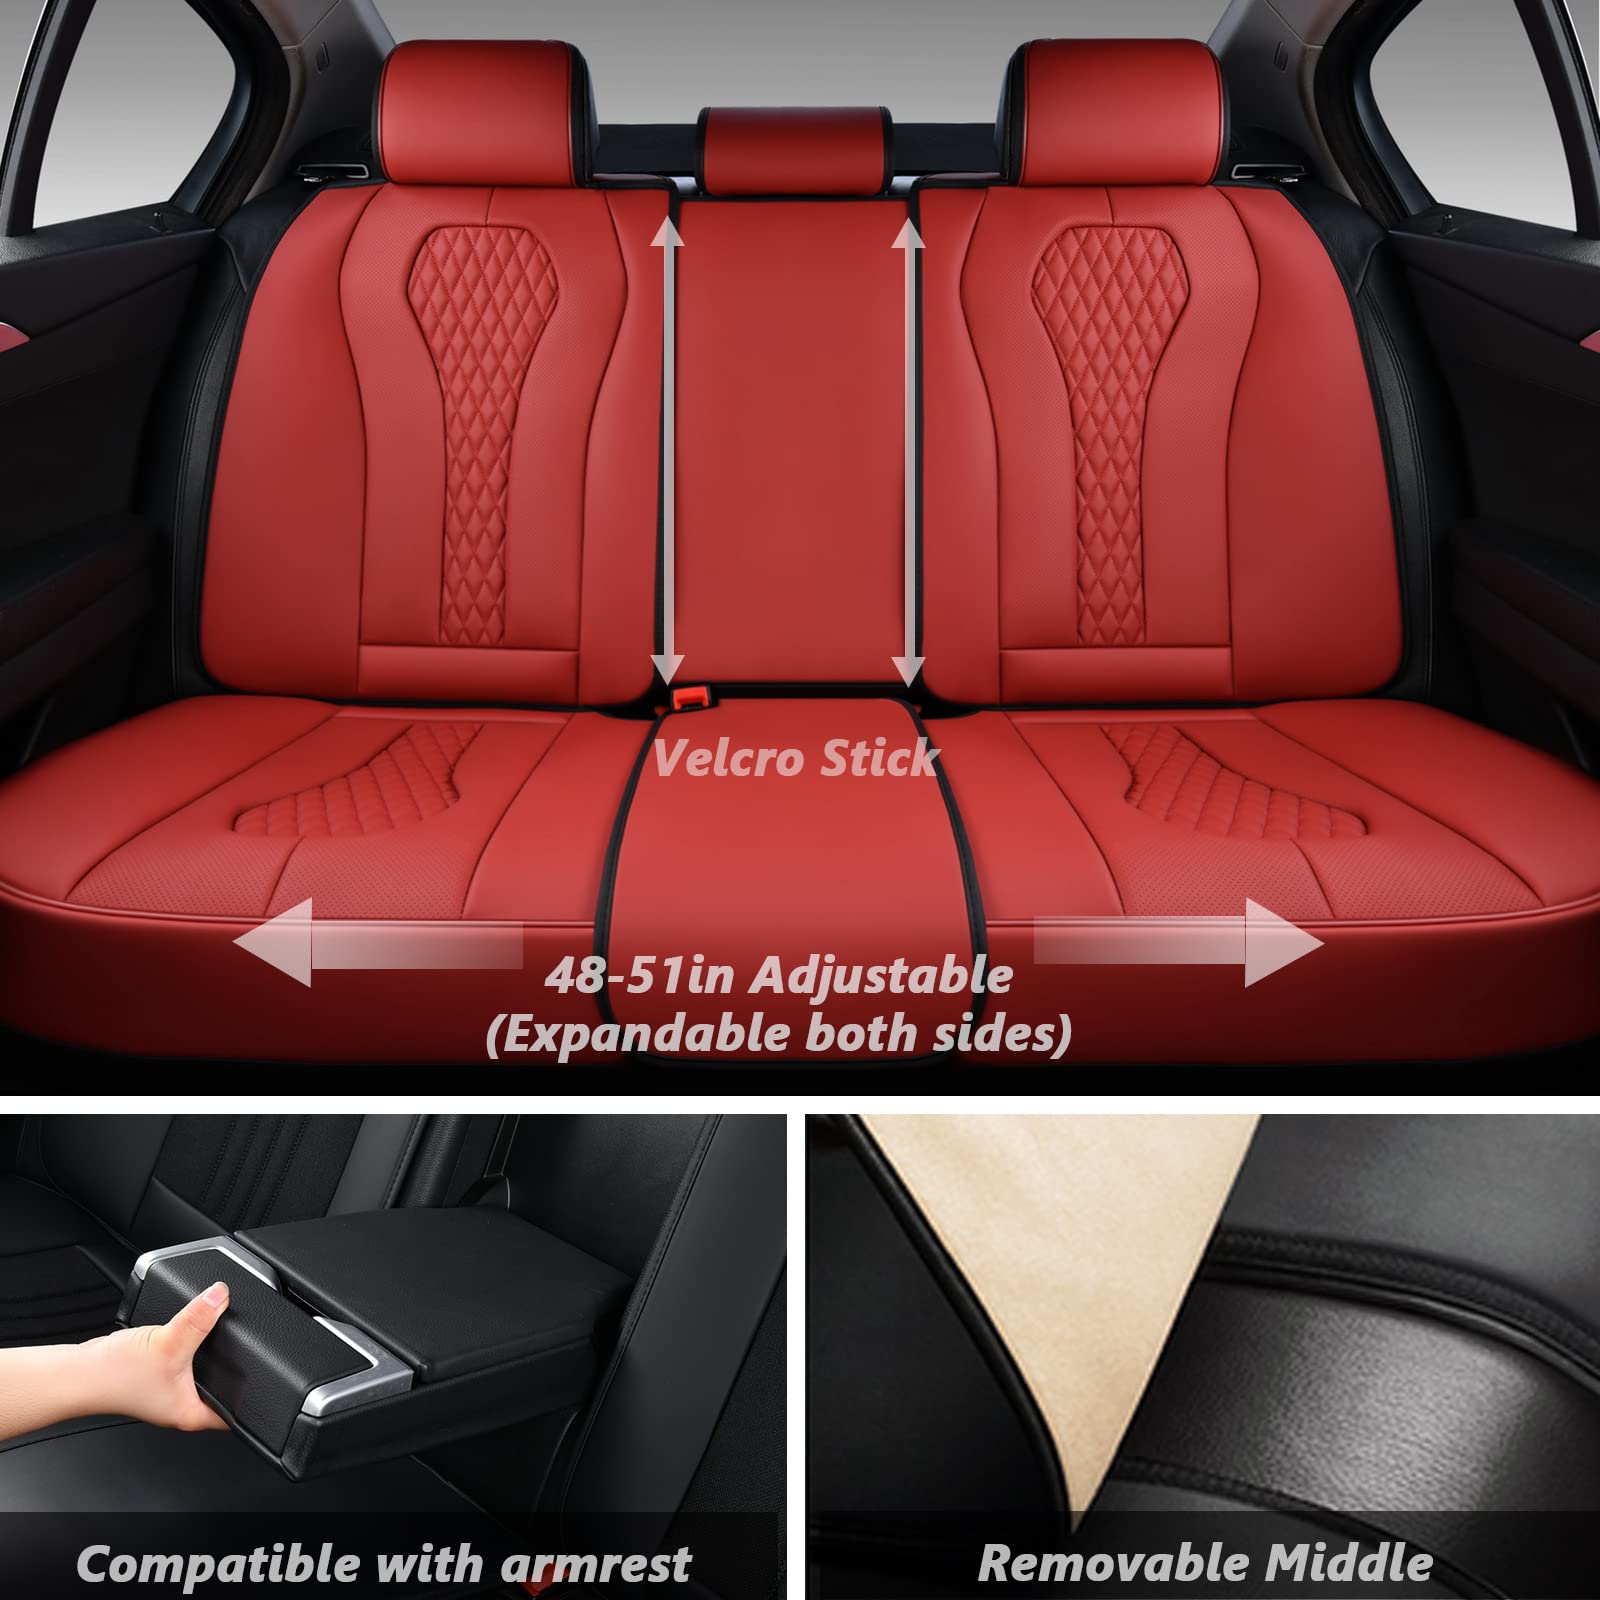 Coverado Seat Covers Full Set, 5 Seats Universal Seat Covers for Cars, Waterproof Luxury Leatherette Seat Cushions, Front and Rear Seat Protectors, Auto Seat Covers Fit for Most Vehicles Red